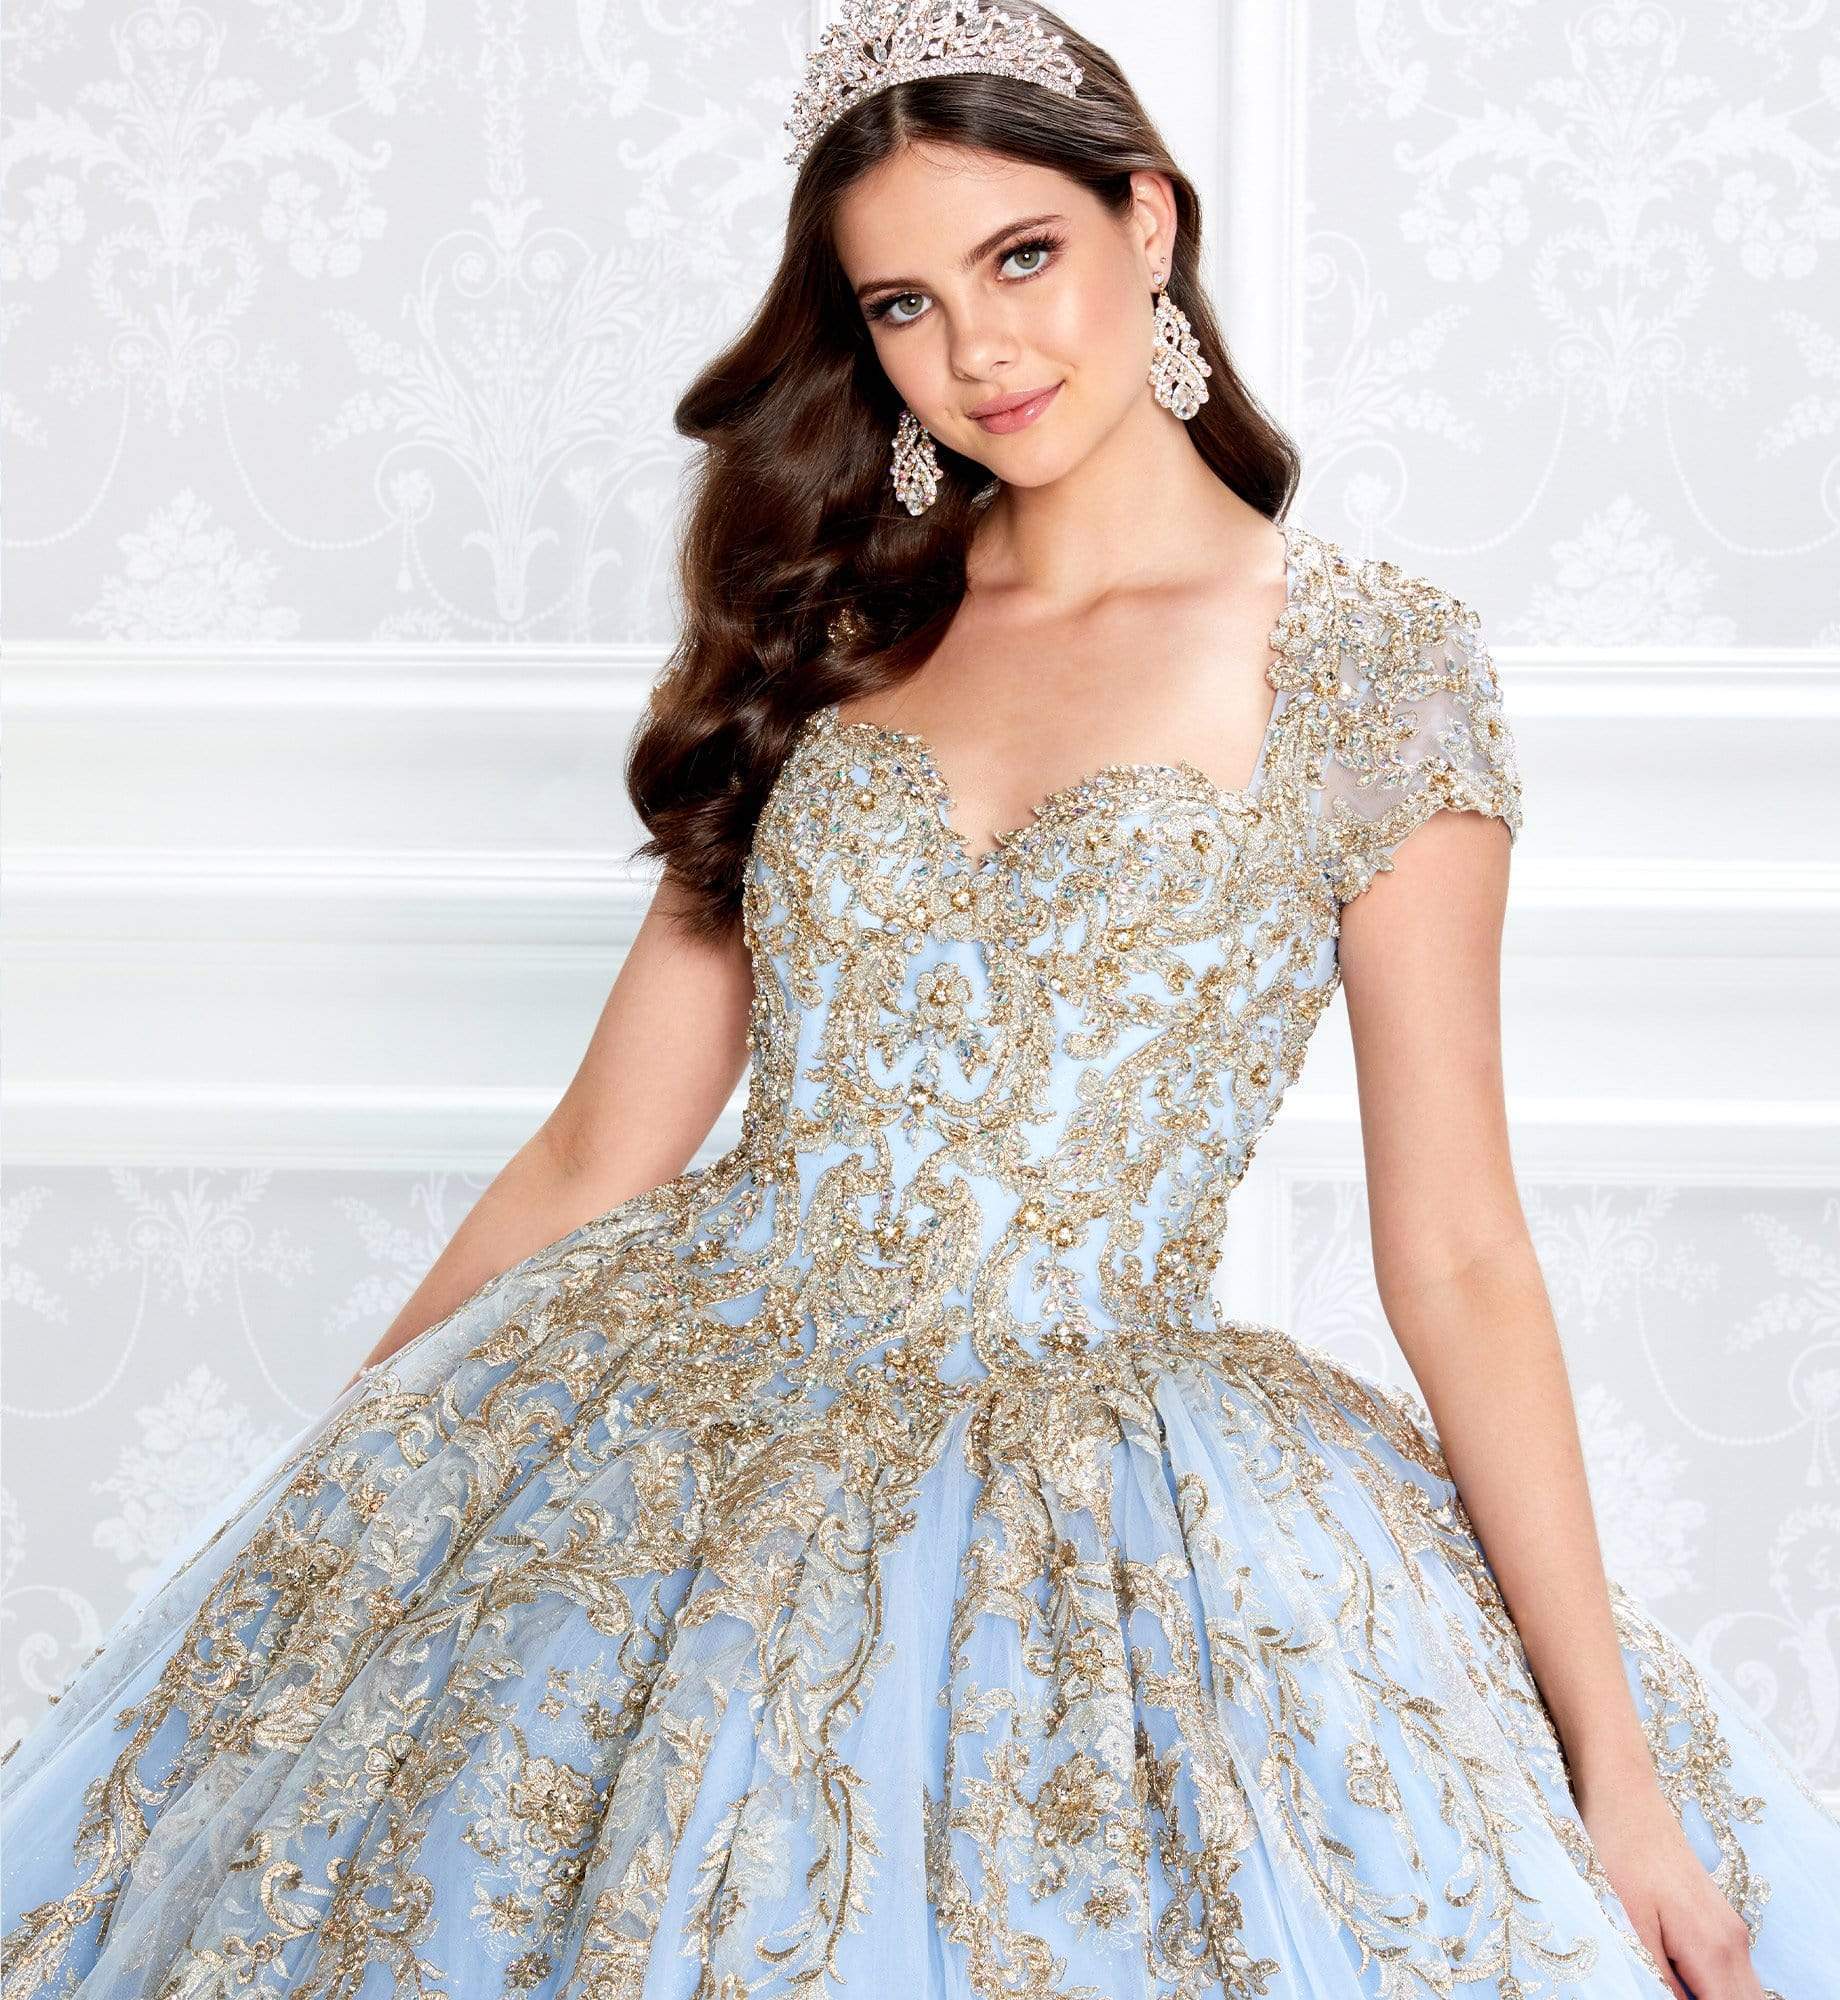 magicdress2011 Gold Applique Ball Gown Princess Prom Dresses 2022 with Detachable Train - 2019 Sweetheart Quinceanera & Sweet 16 Birthday Party Wear